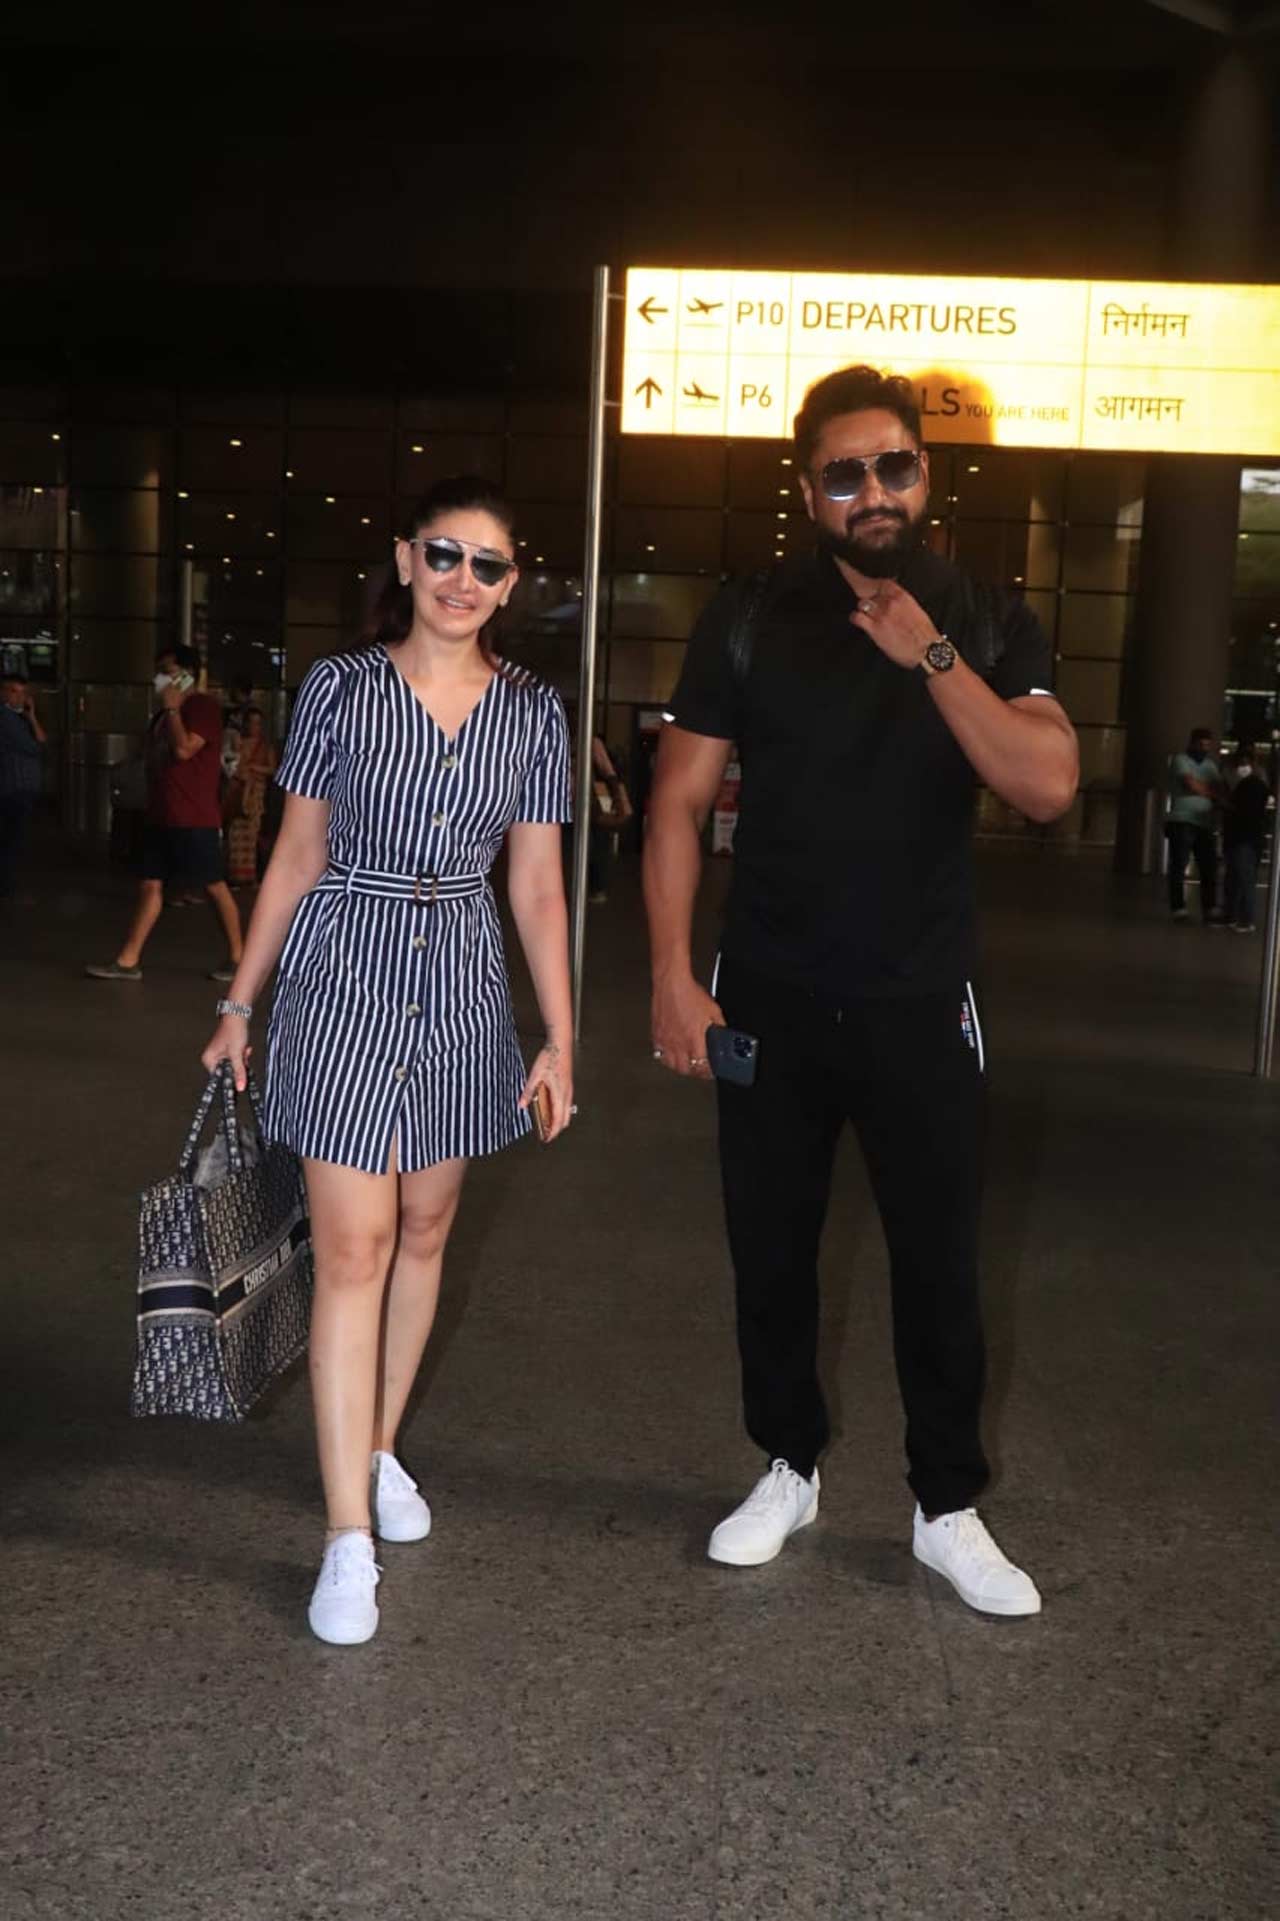 Shefali Jariwala and Parag Tyagi, who were chilling on the pristine sand of Maldives, returned to Mumbai this weekend. The duo posed for the shutterbugs at the Mumbai airport.